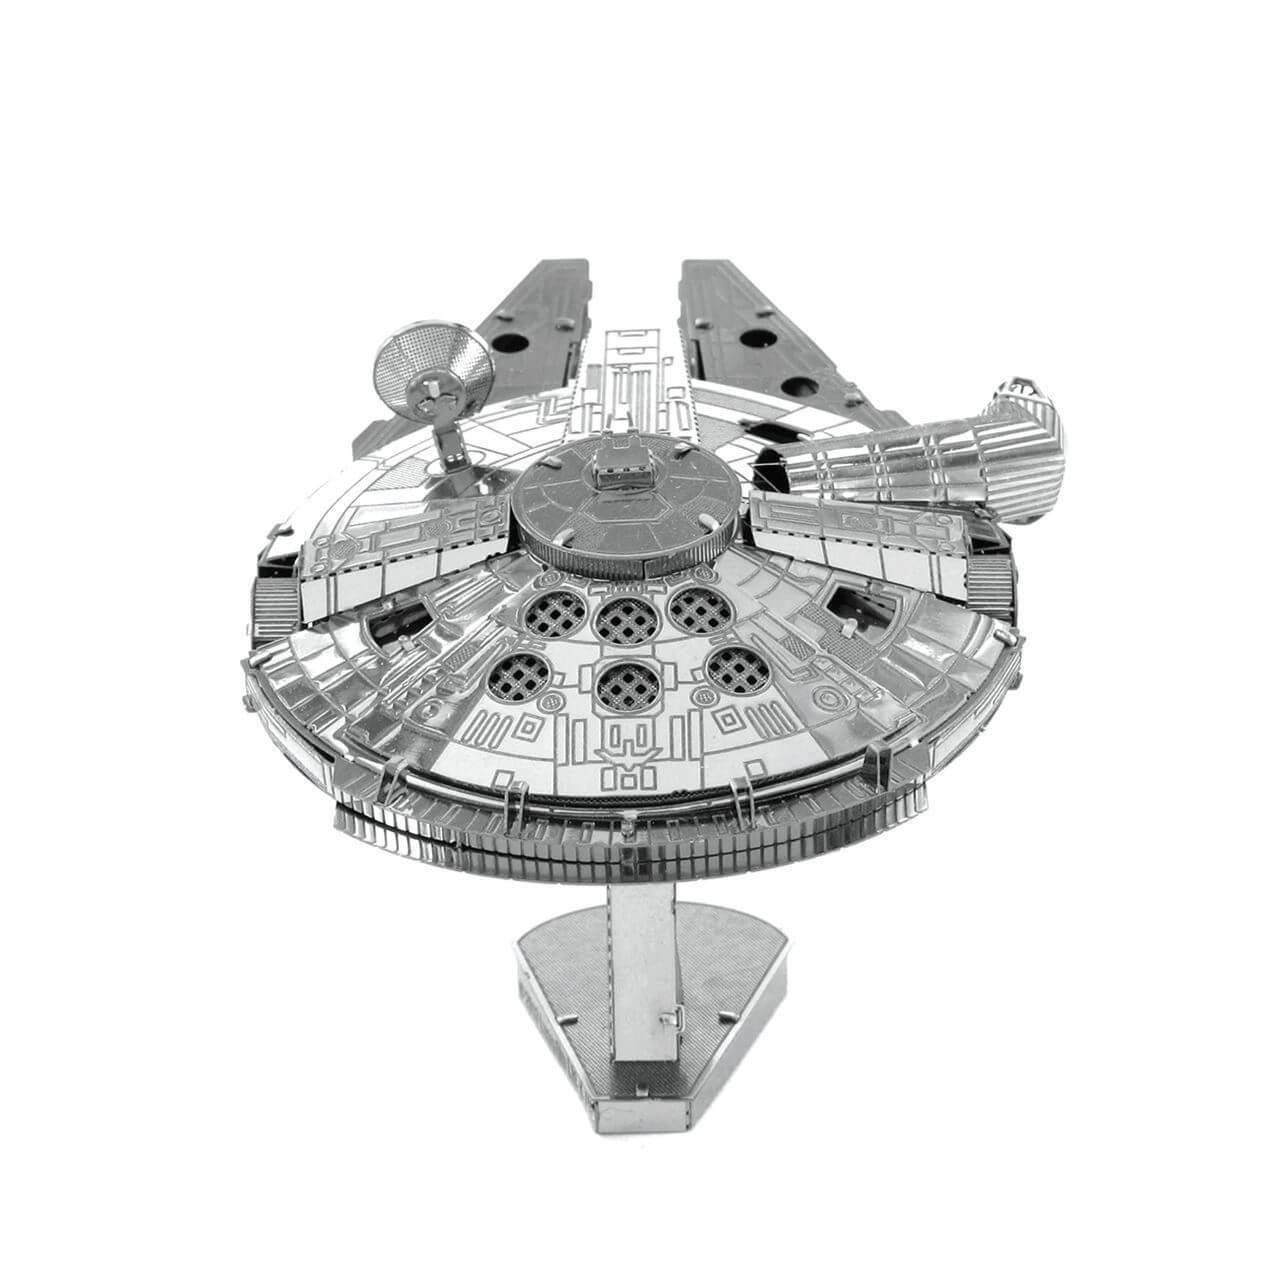 Back view of the Metal Earth Star Wars Millennium Falcon Metal Model Kit - 2 Sheets.